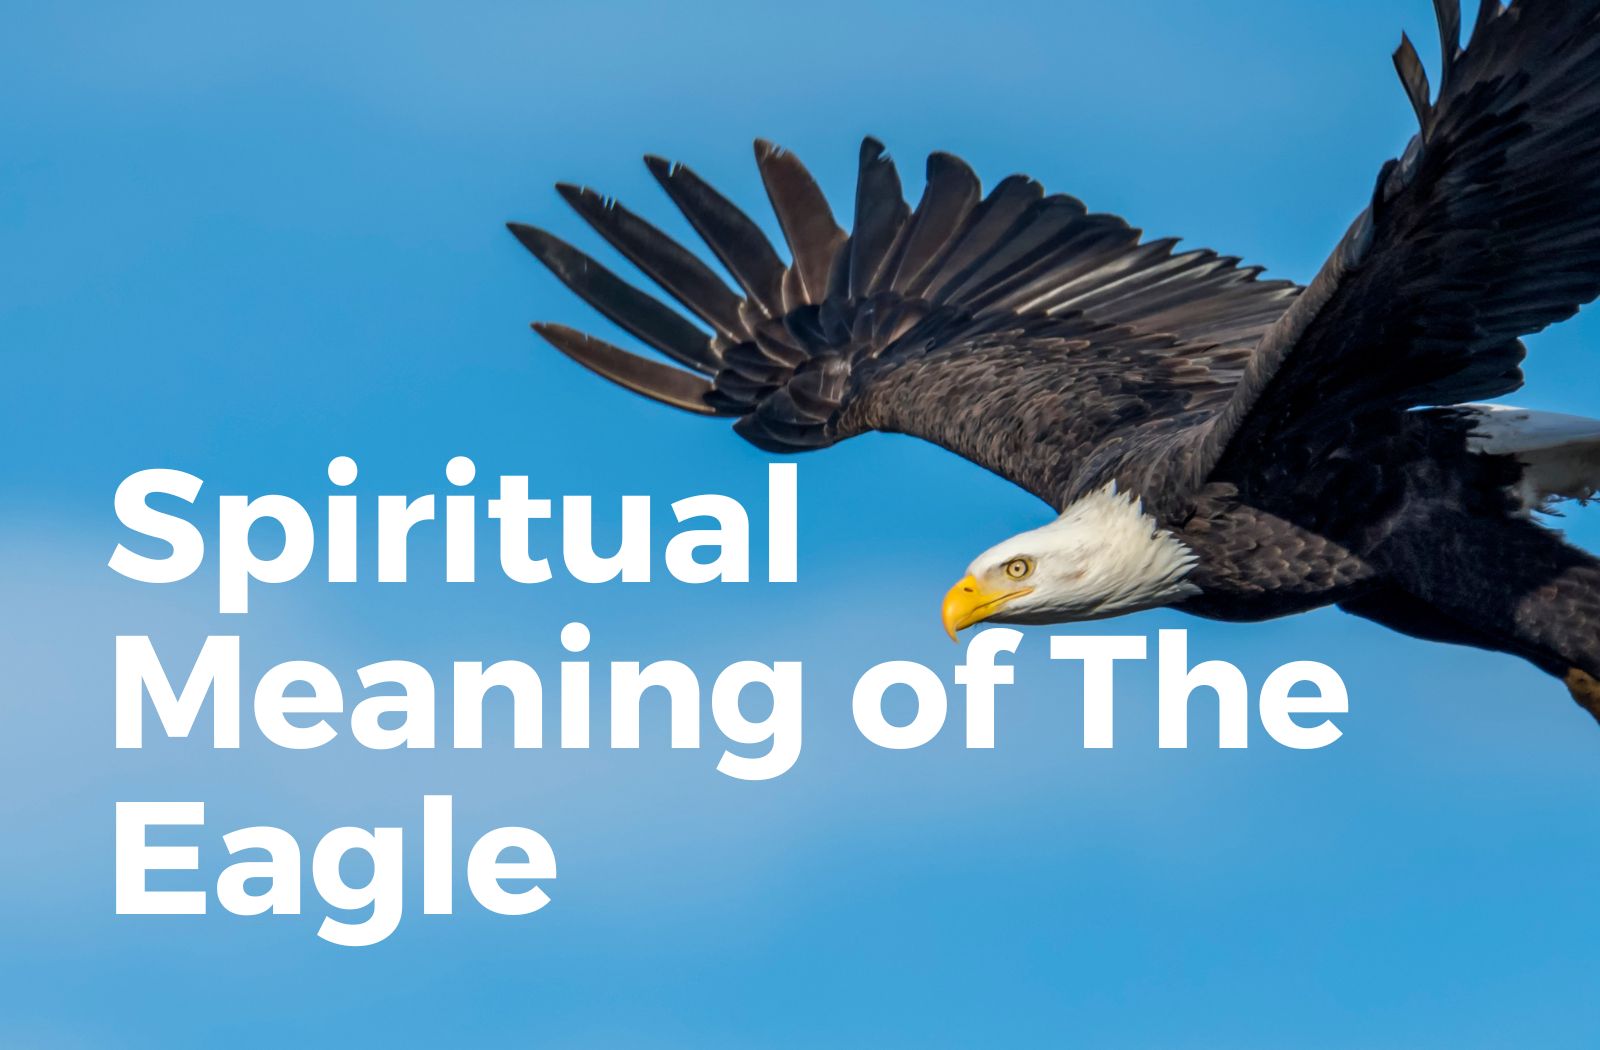 Spiritual meaning of eagle